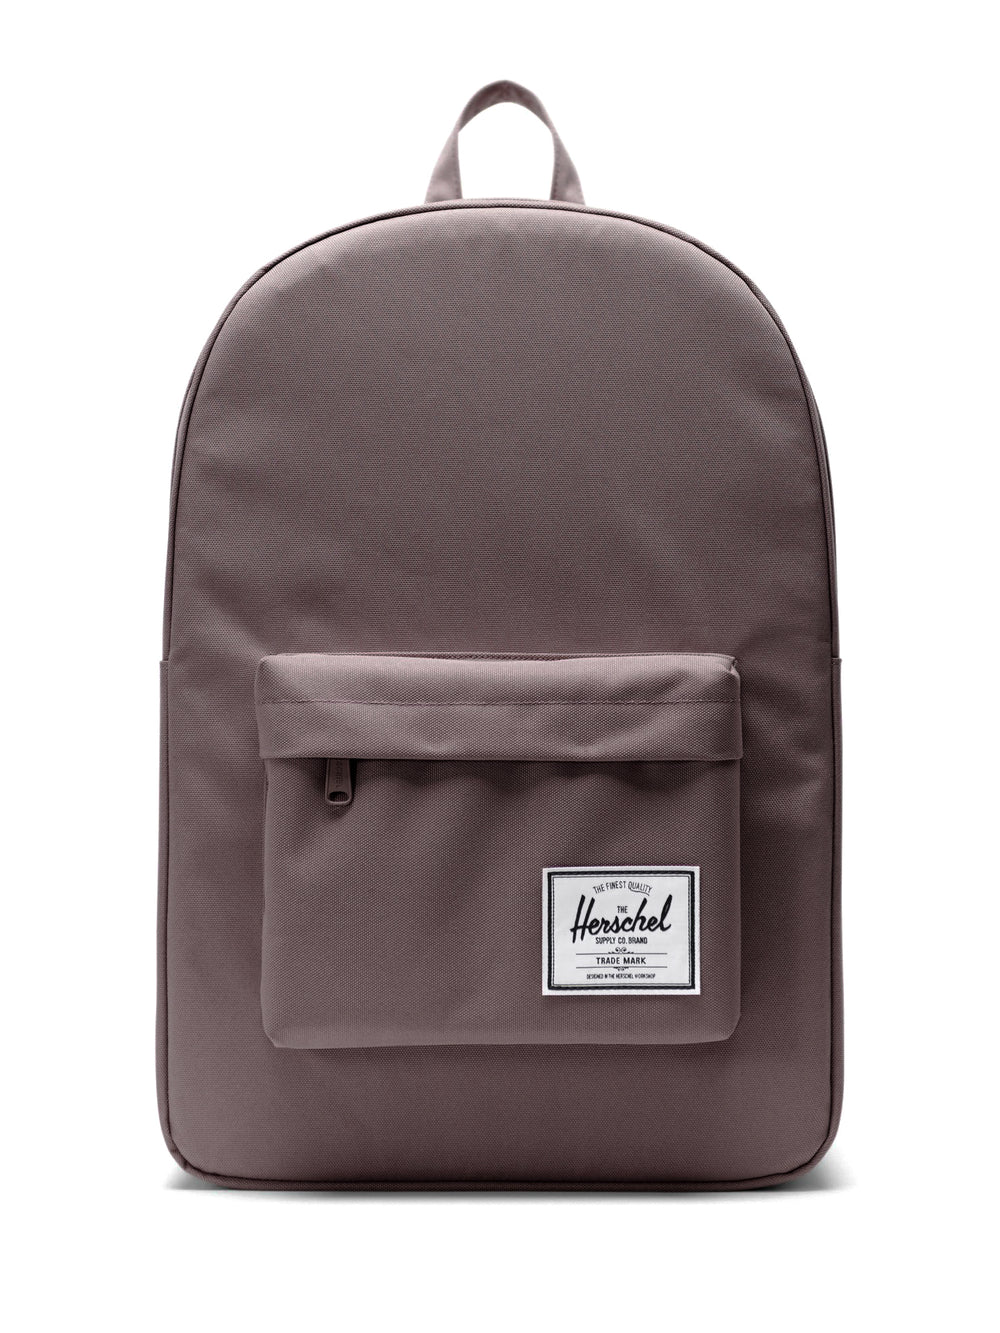 HERSCHEL SUPPLY CO. MIDWAY 25L BACKPACK - SPARROW